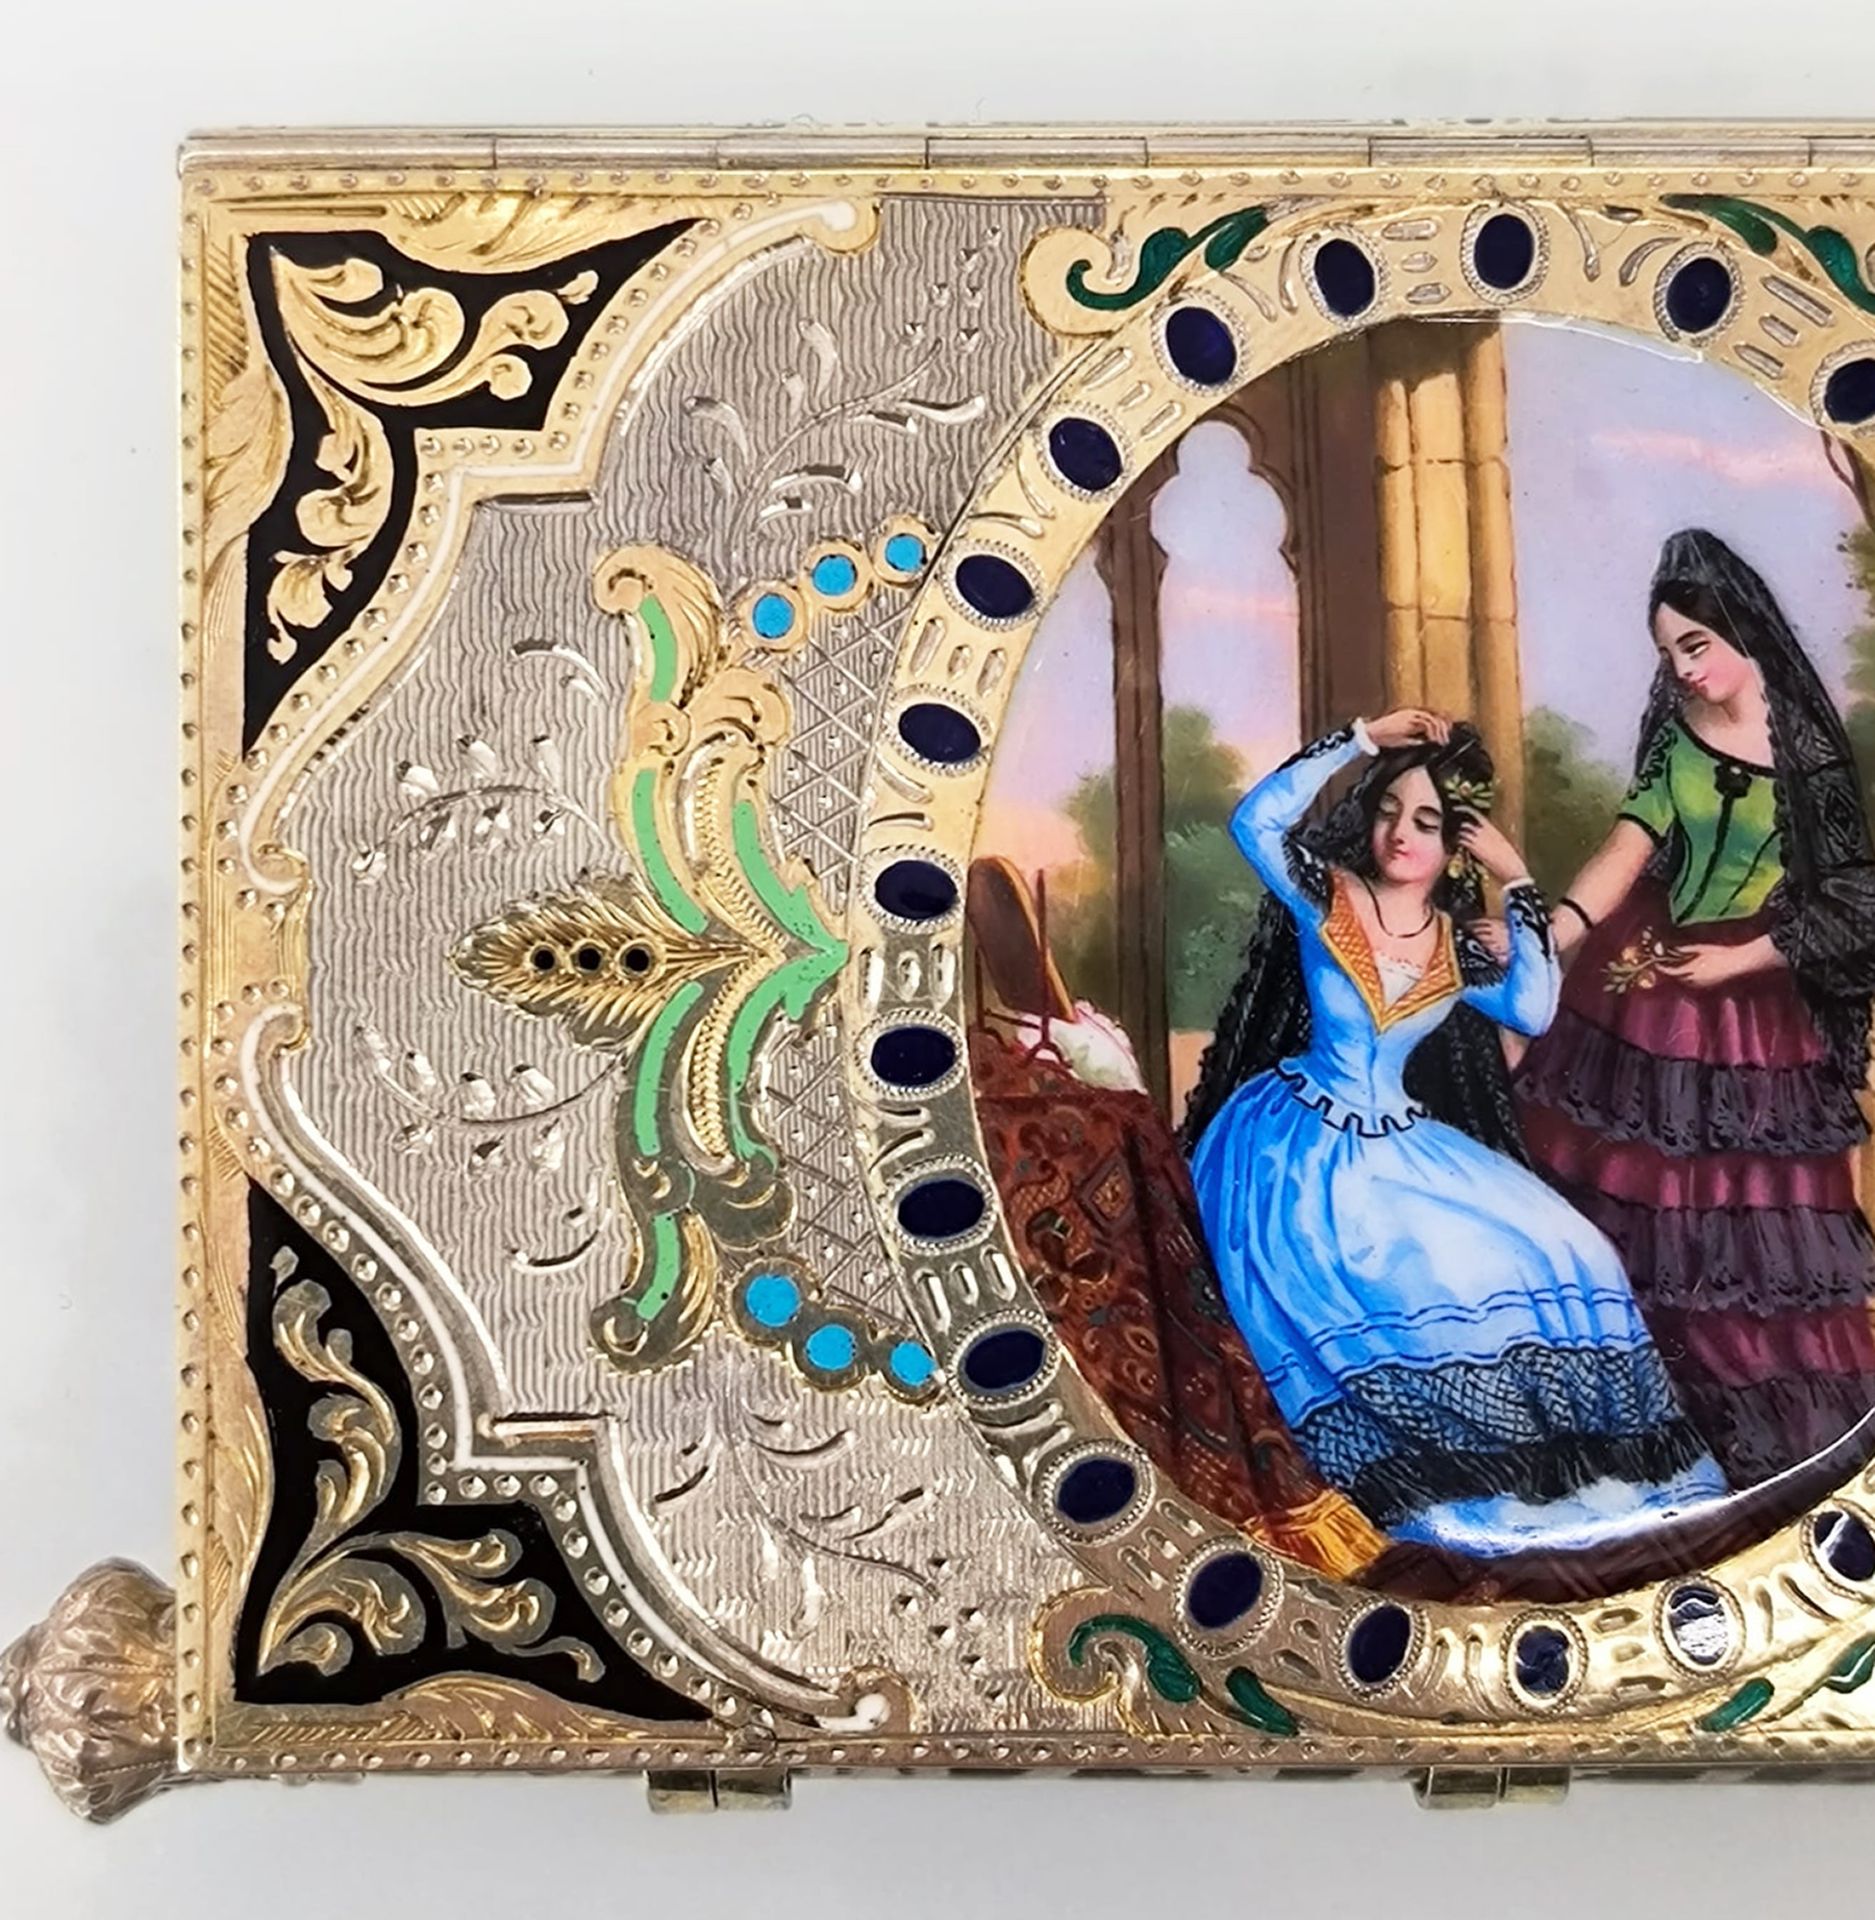 Etui Voyage in silver with a double-sided gallant scene and gold guilloché enamel, 19th century - Image 6 of 7